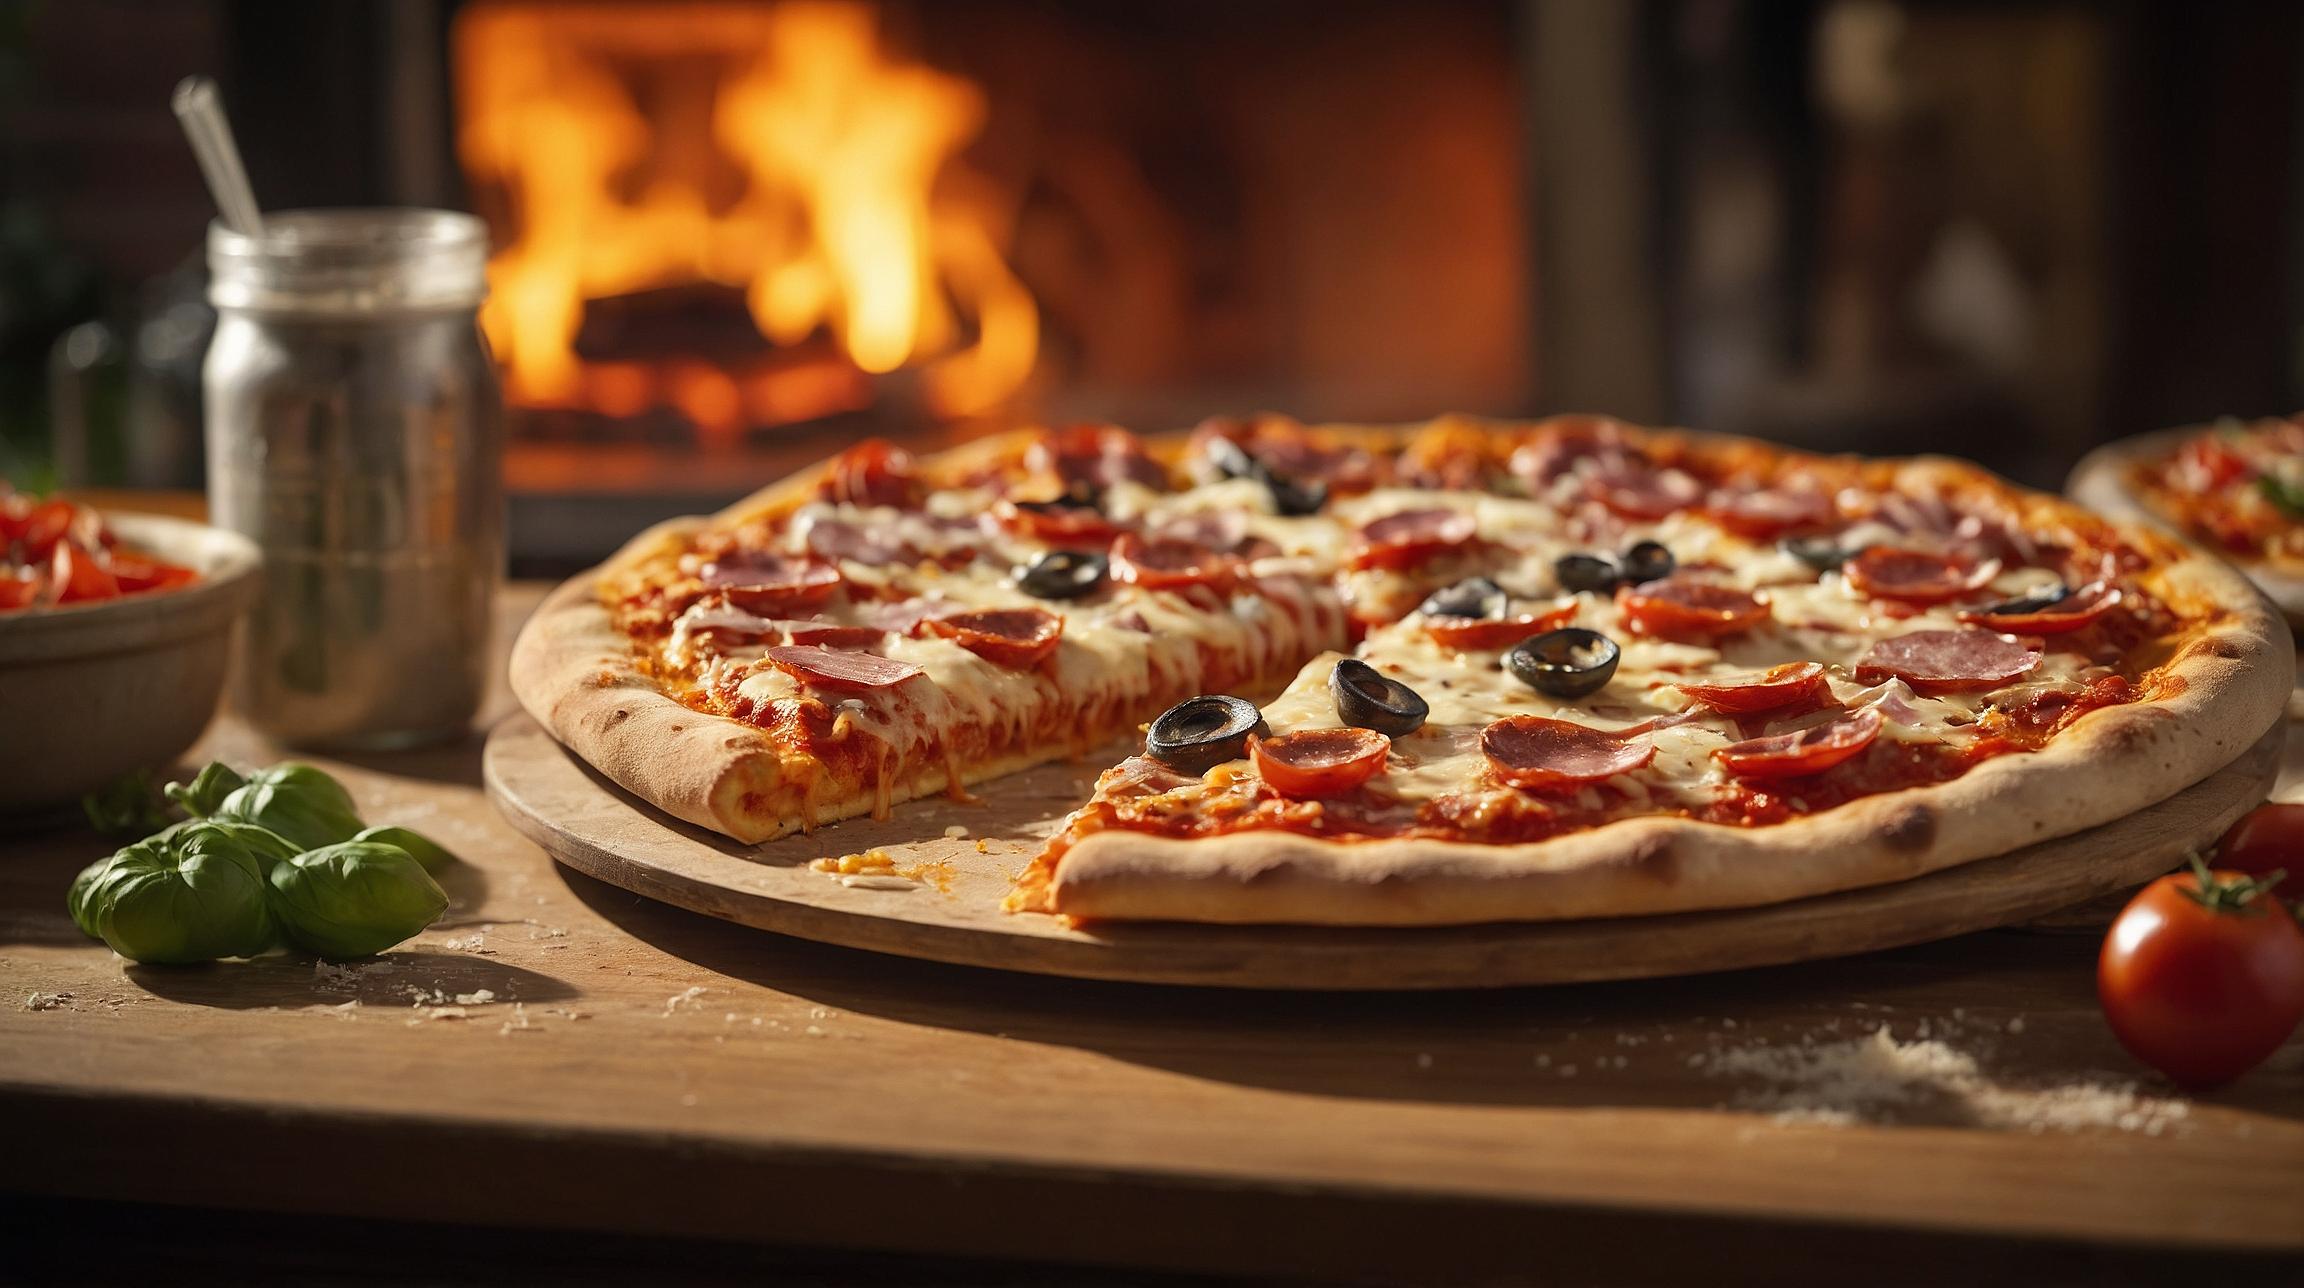 Investment Group Acquires Duane's Pizza, Plans Expansion | FinOracle